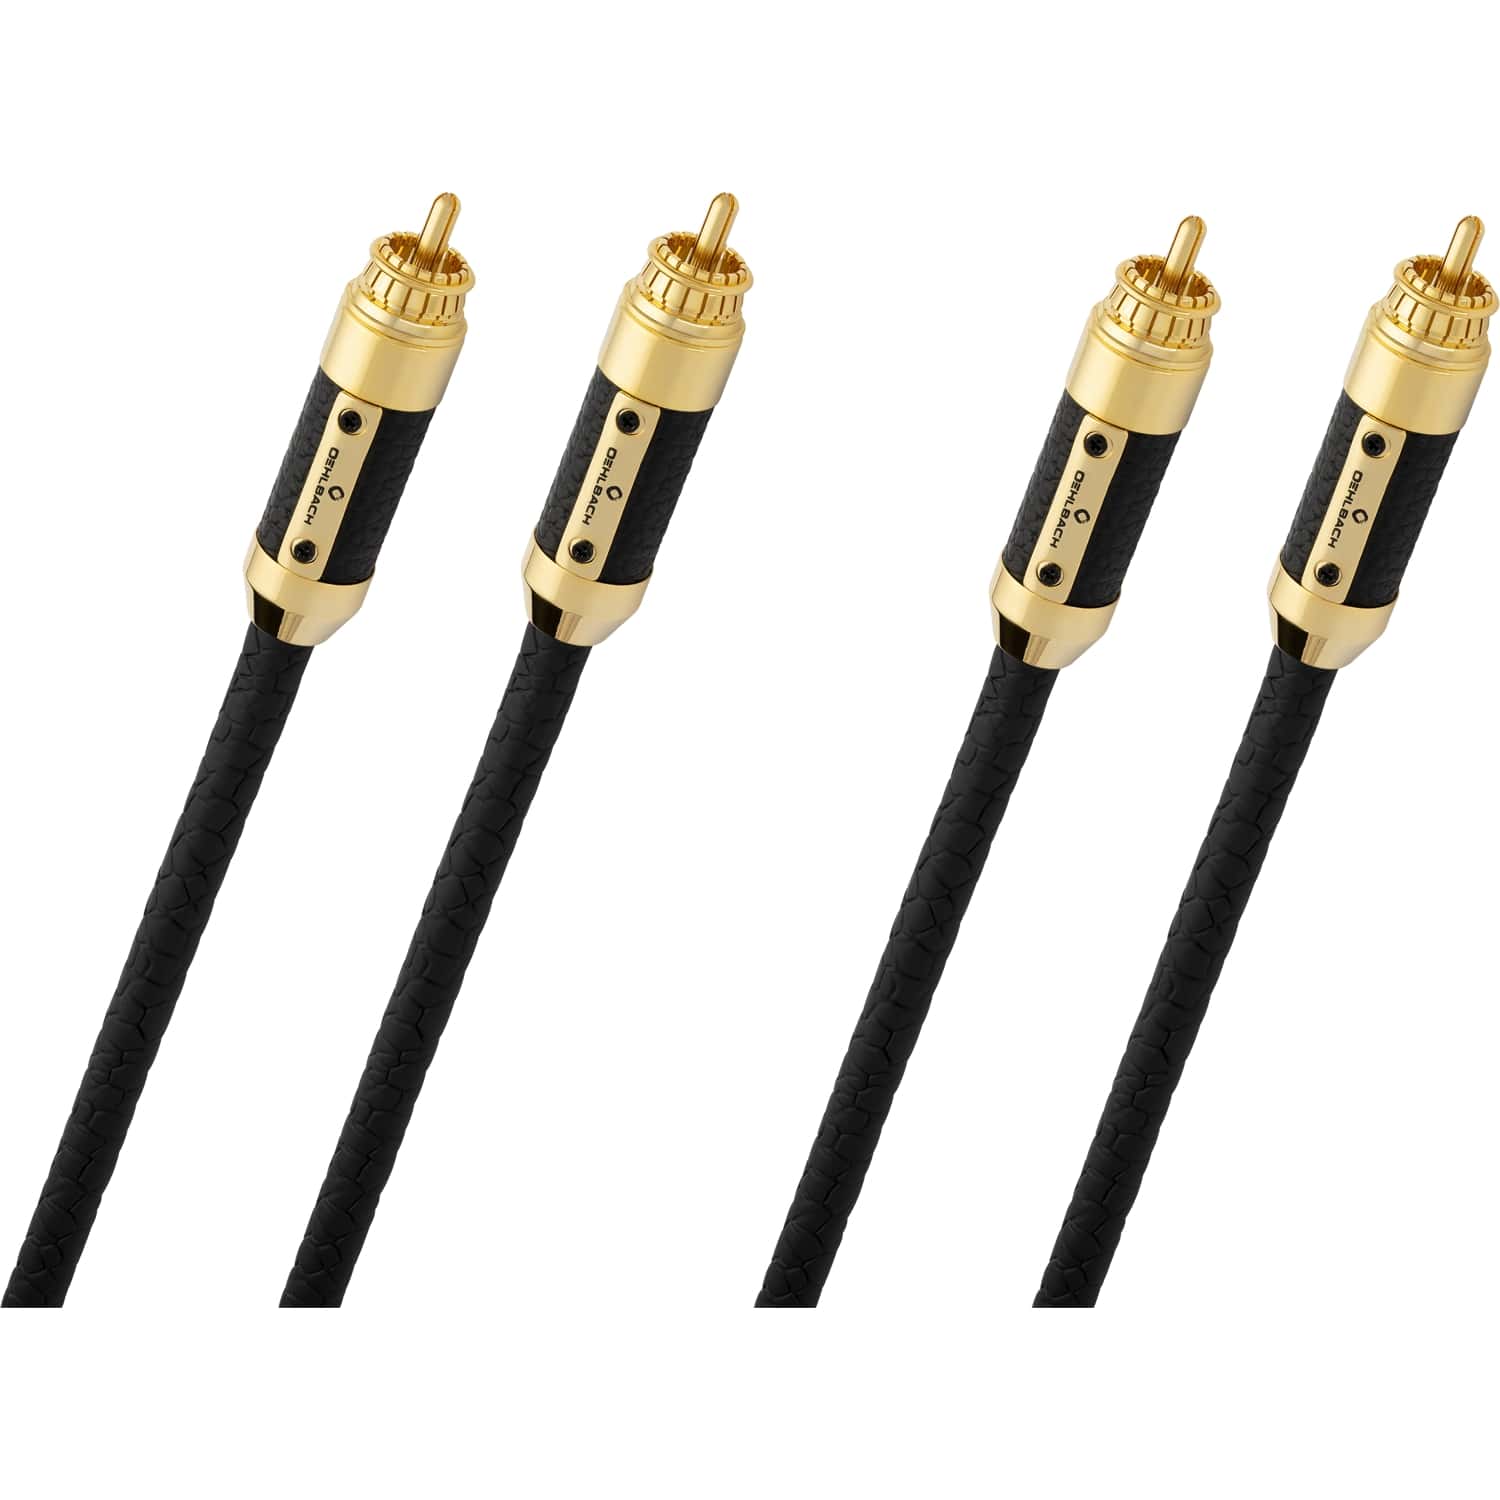 Кабели межблочные аудио Oehlbach STATE OF THE ART XXL Black Connection Cable RCA, 2x1,50m, gold кабели акустические в нарезку oehlbach performance speaker cable 2x1 50mm2 clear 20m spool d1c105